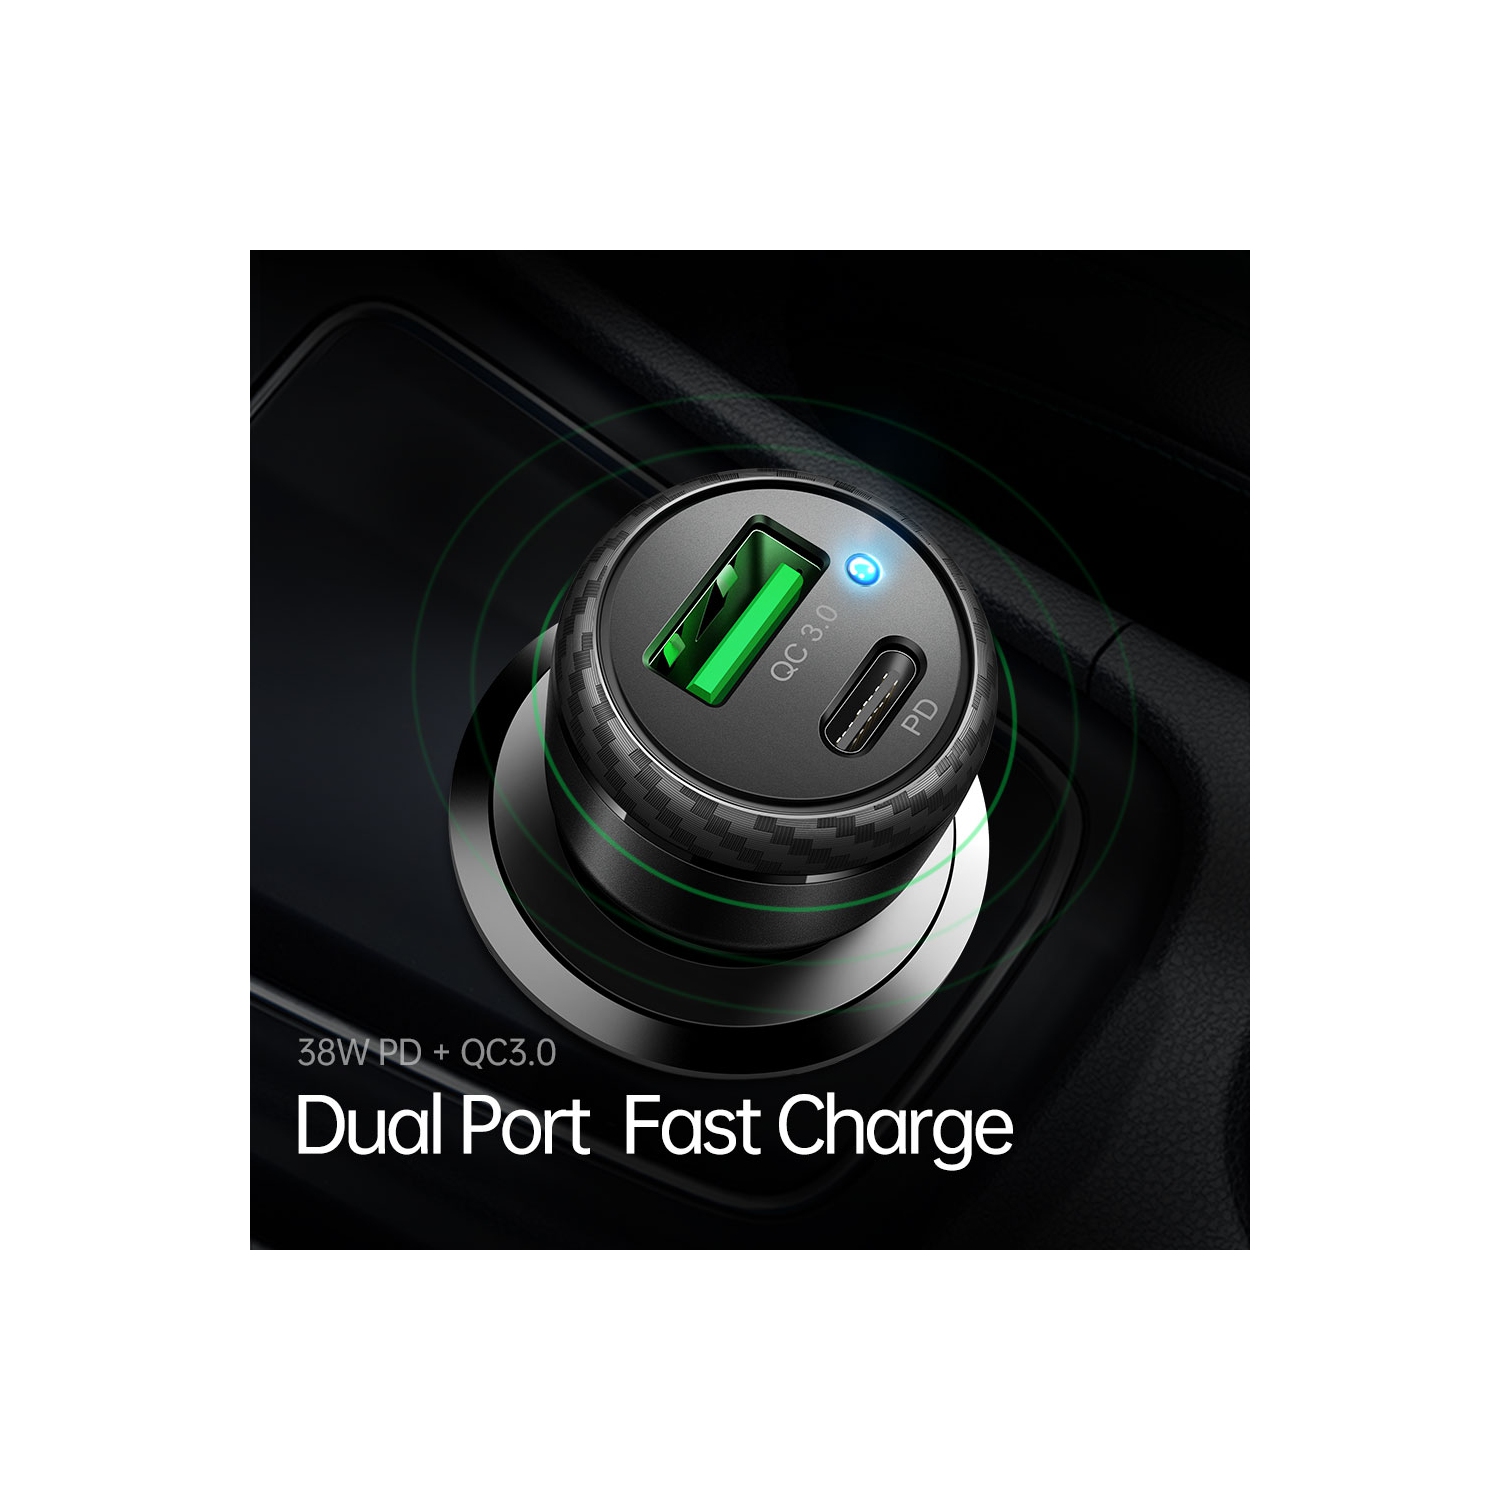 Mcdodo 20W PD Fast Dual-Port Car Charger USB C 3A Fast Charging Car Adapter Dual USB PD Quick Charge for iPhone 13, 12, 11 Pro Max, XR, X, 8, 7 Plus Galaxy Note 20 Ultra S21 S9 S8 Pixel, LG